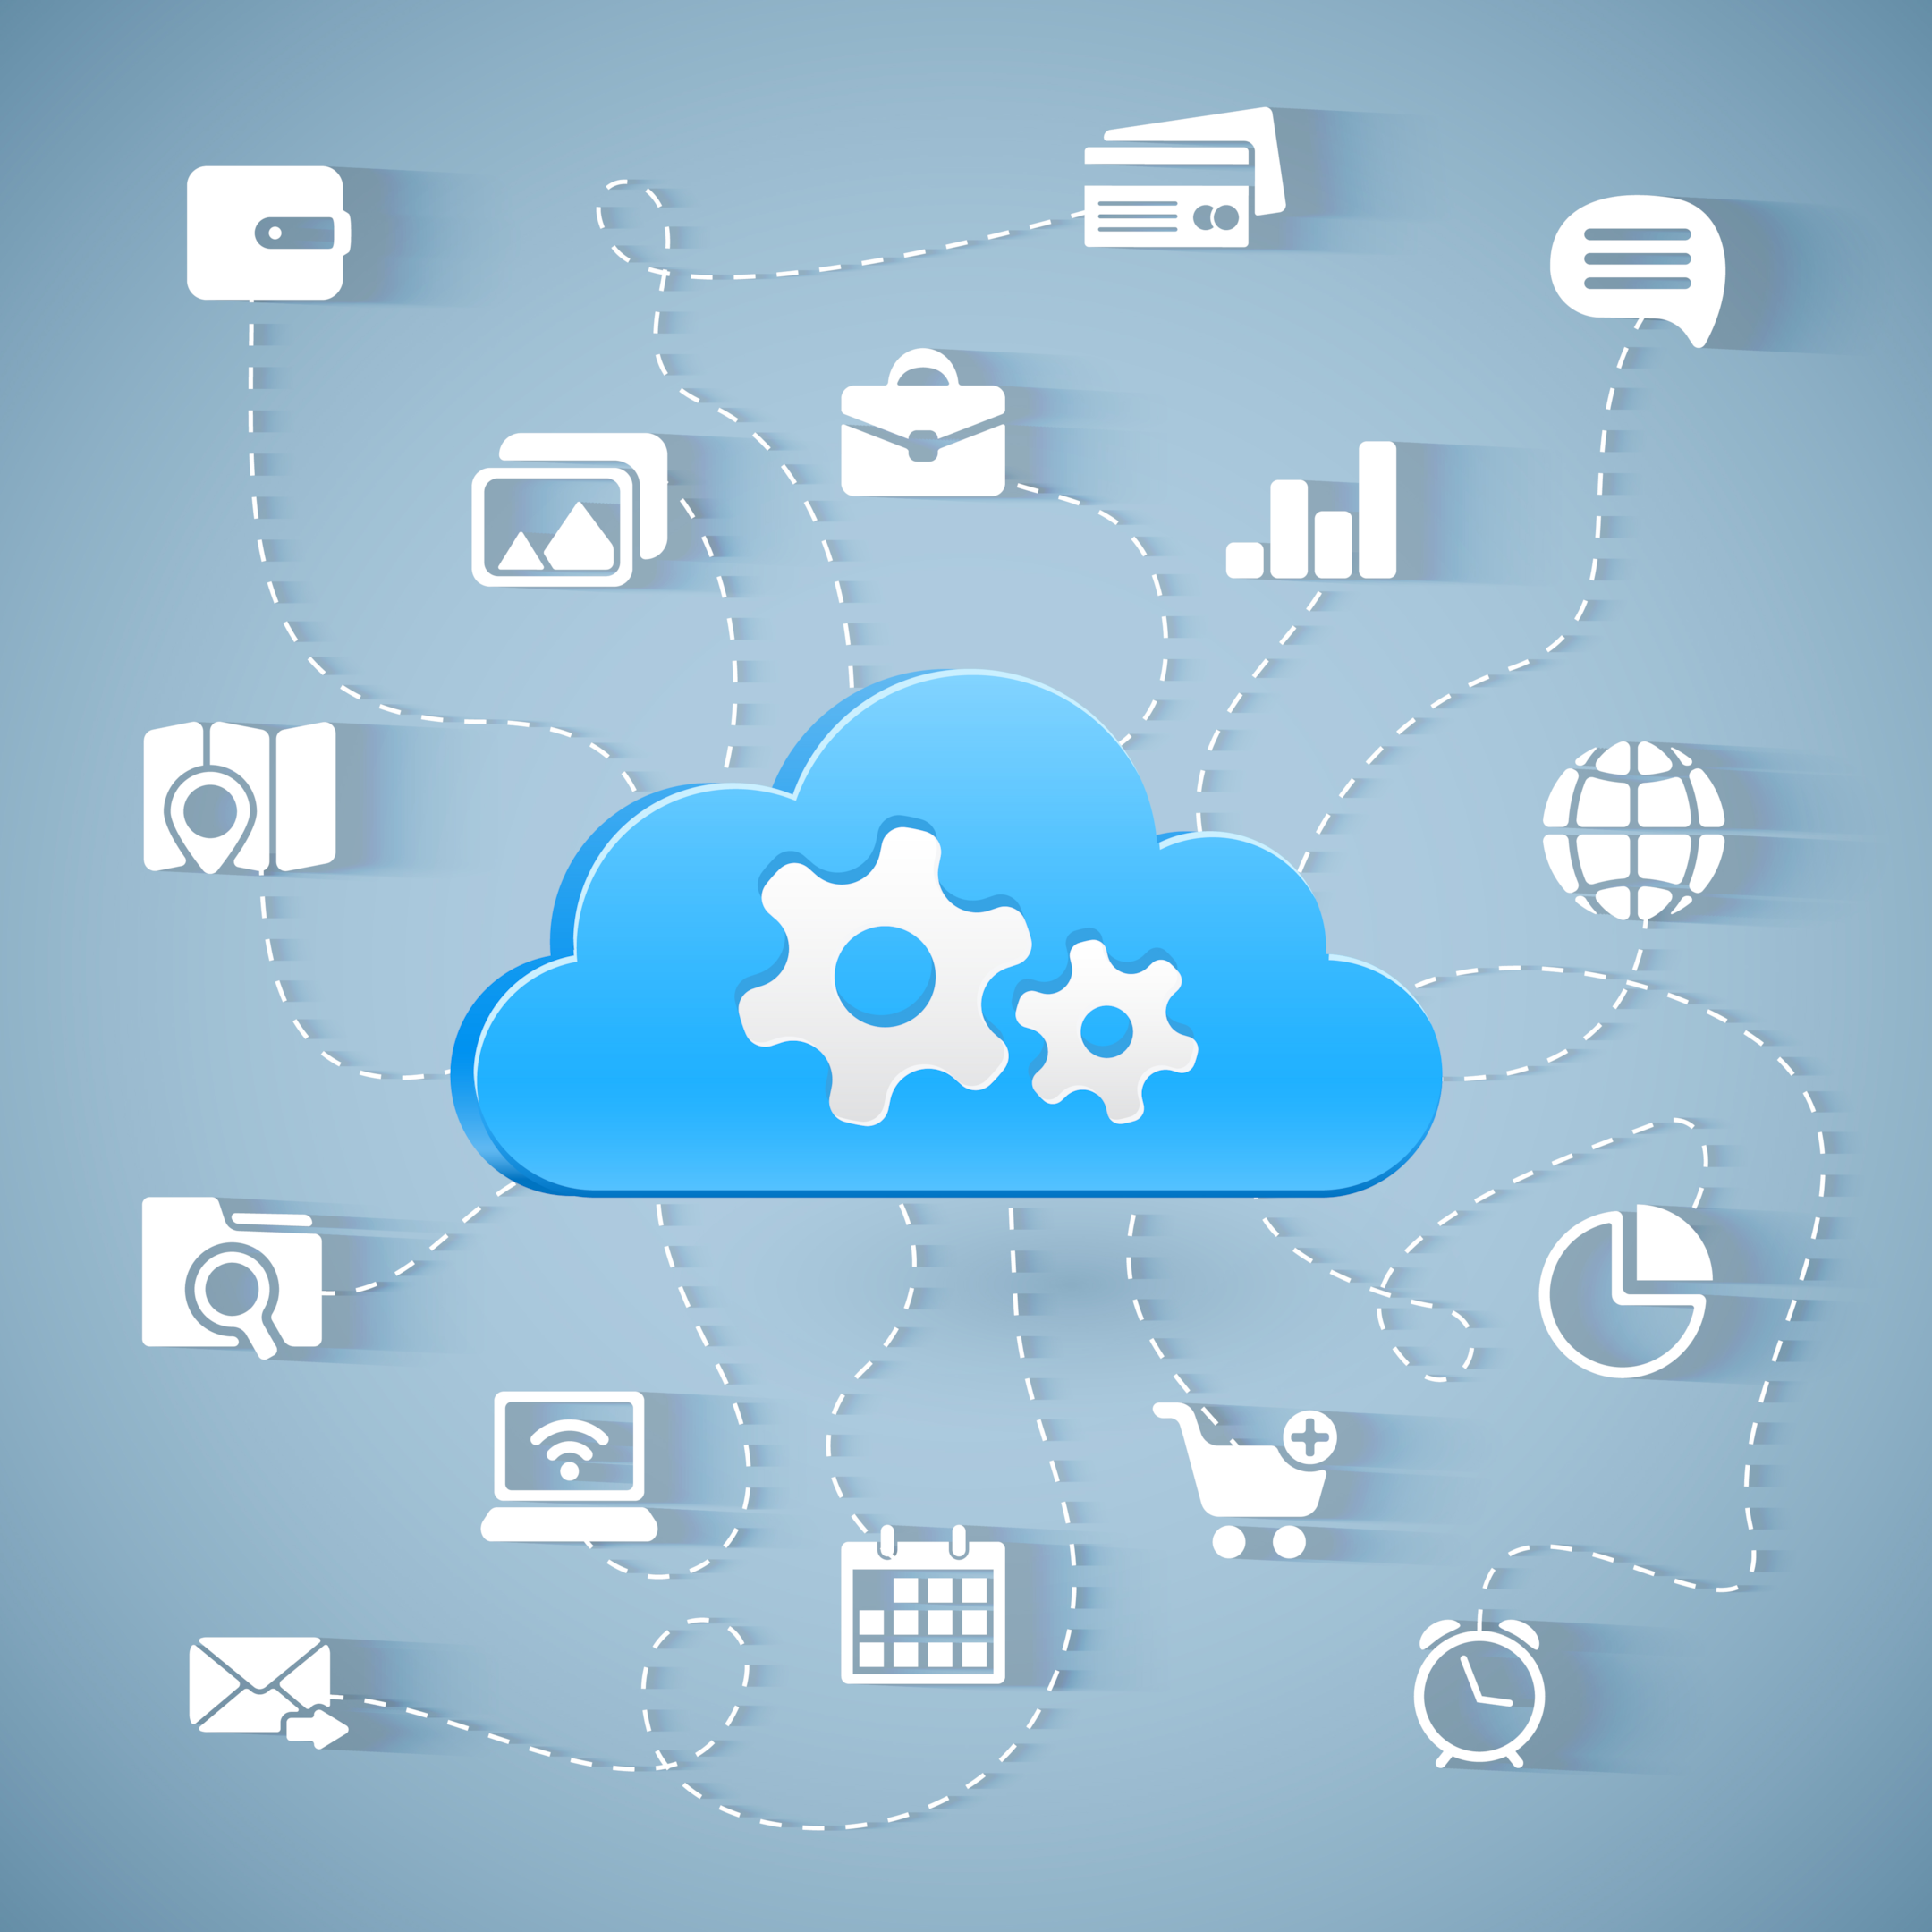 The image represents multiple icons interconnected as a cloud infrastructure system